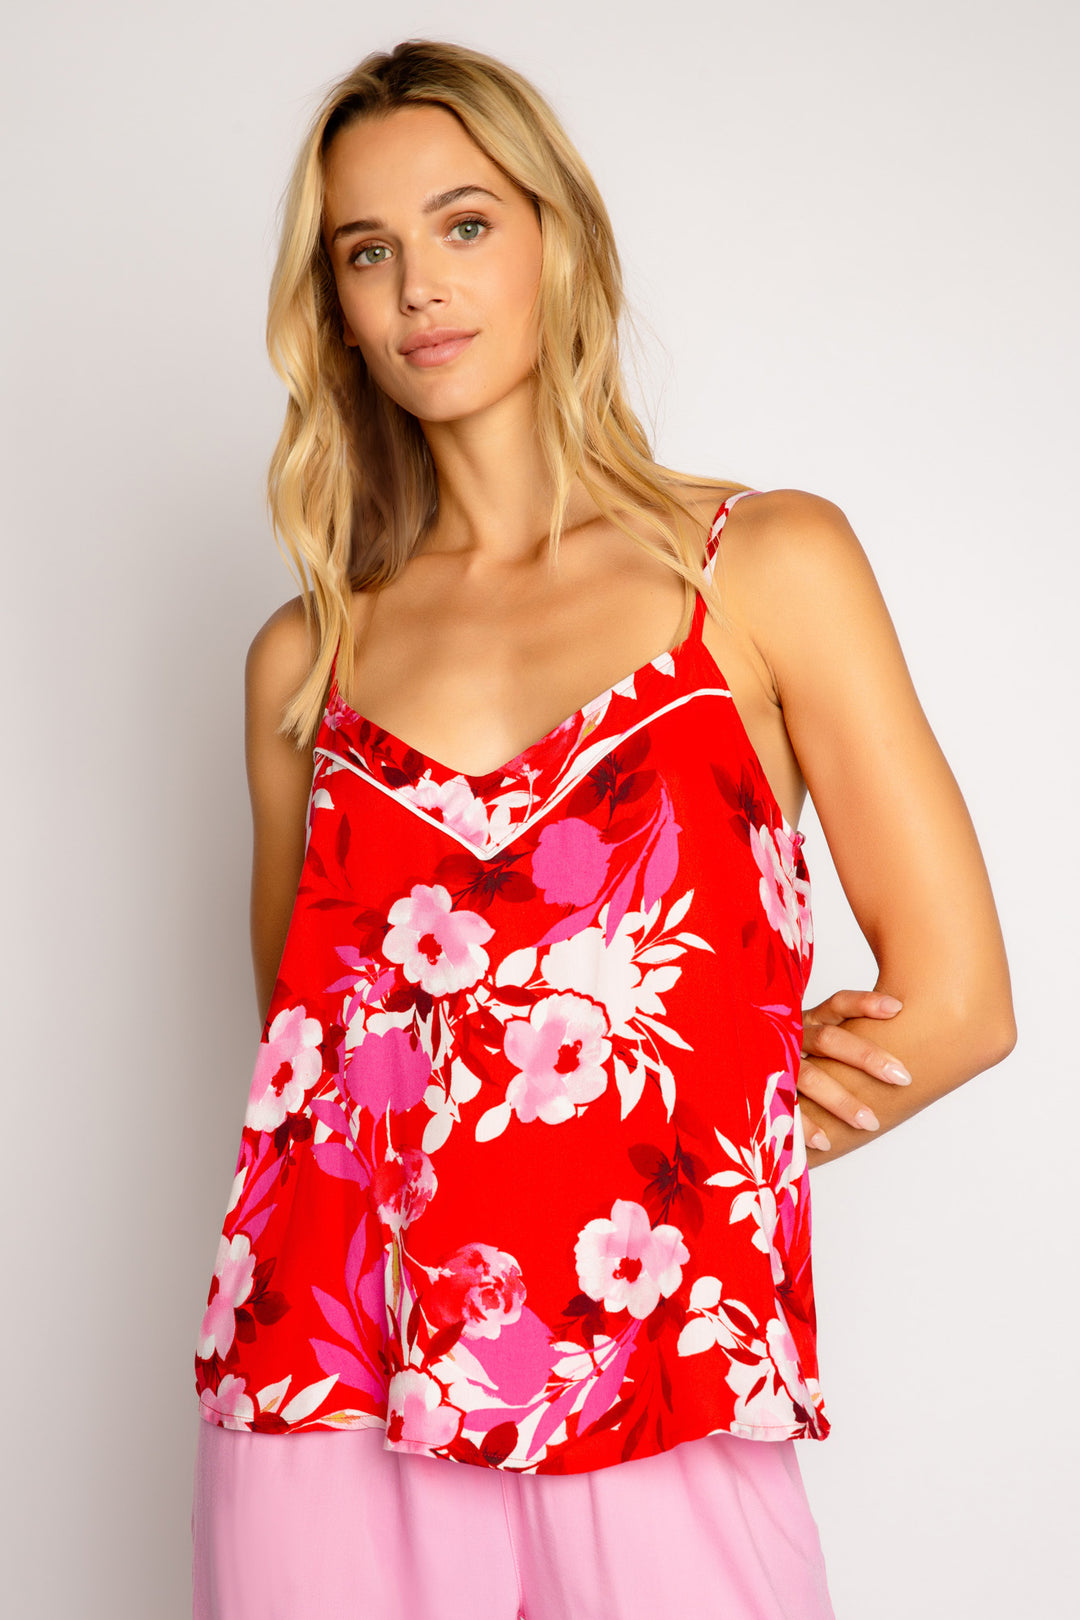 Strappy camisole in red-pink floral-printed woven sateen. Adjustable straps with shelf bra lining. (7325669228644)